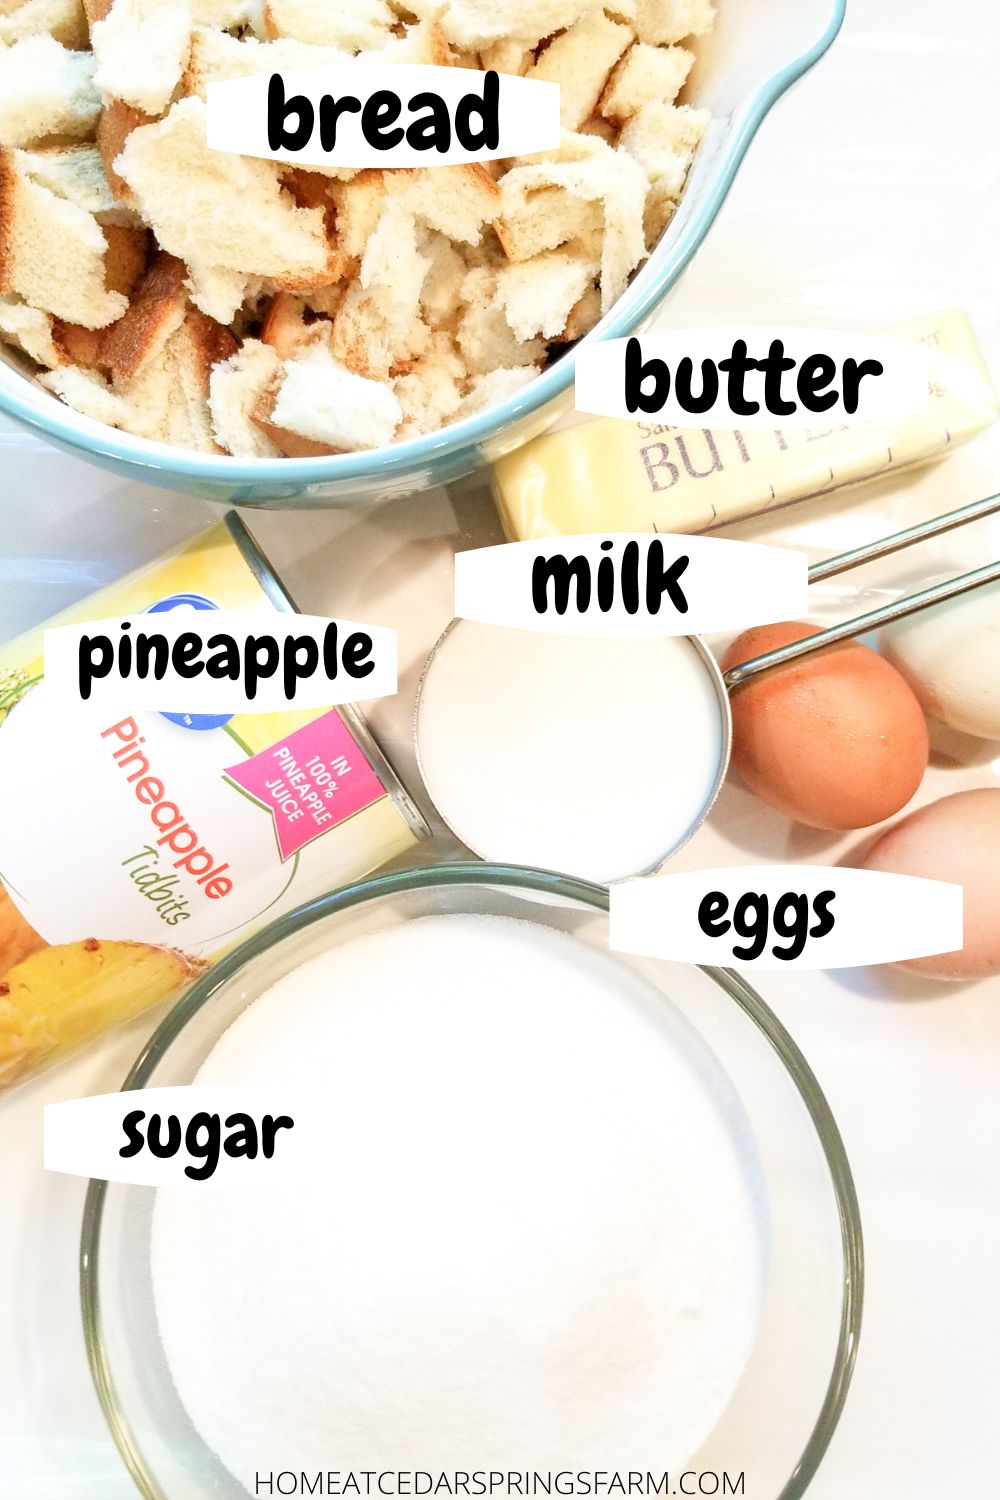 Picture of ingredients for pineapple casserole with text overlay